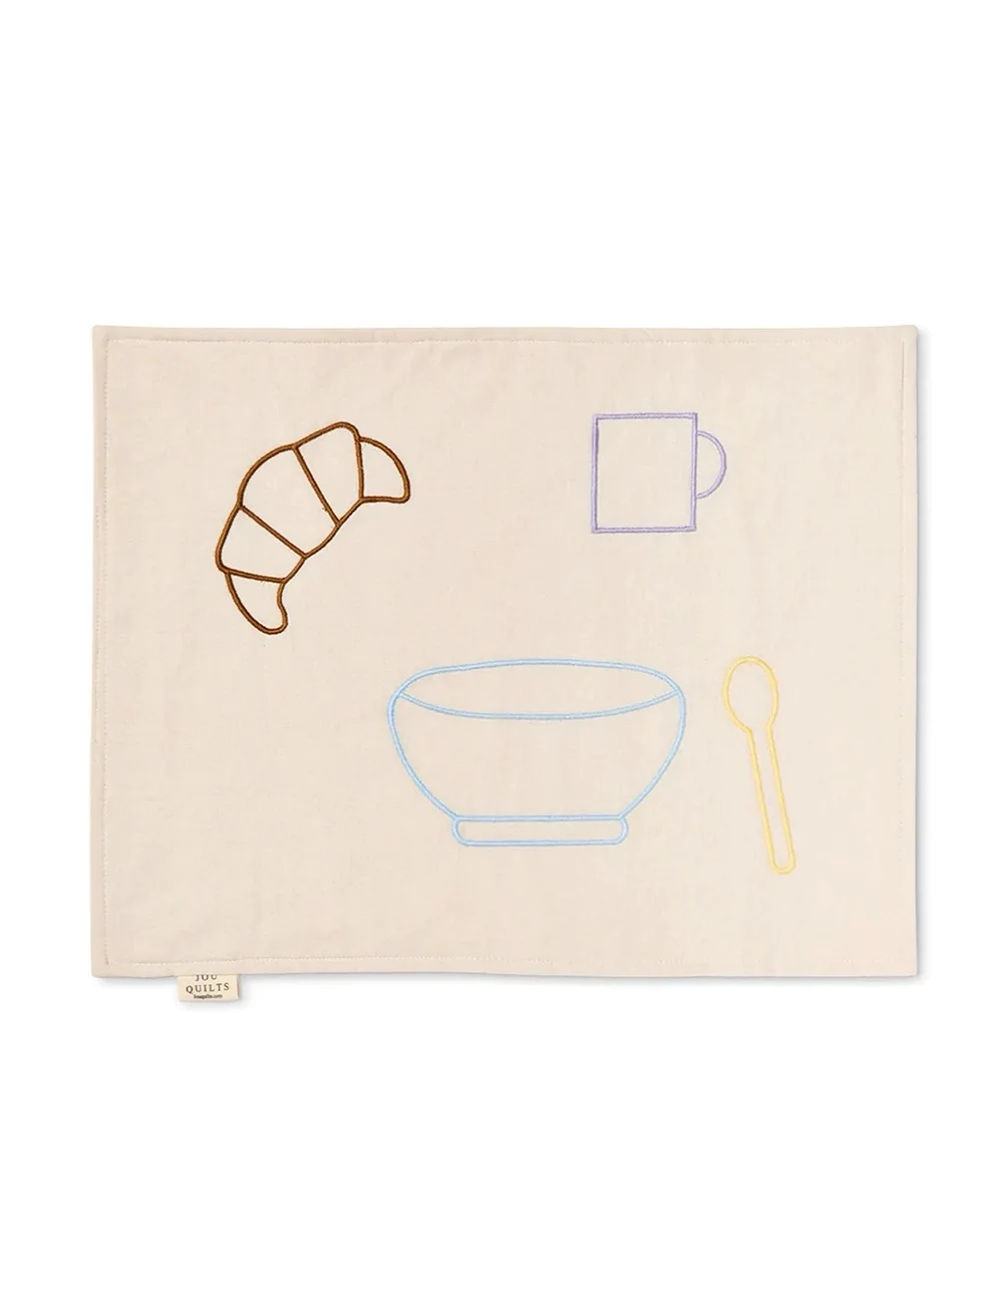 (JOU QUILTS) Embroidery Place Mat - Breakfast